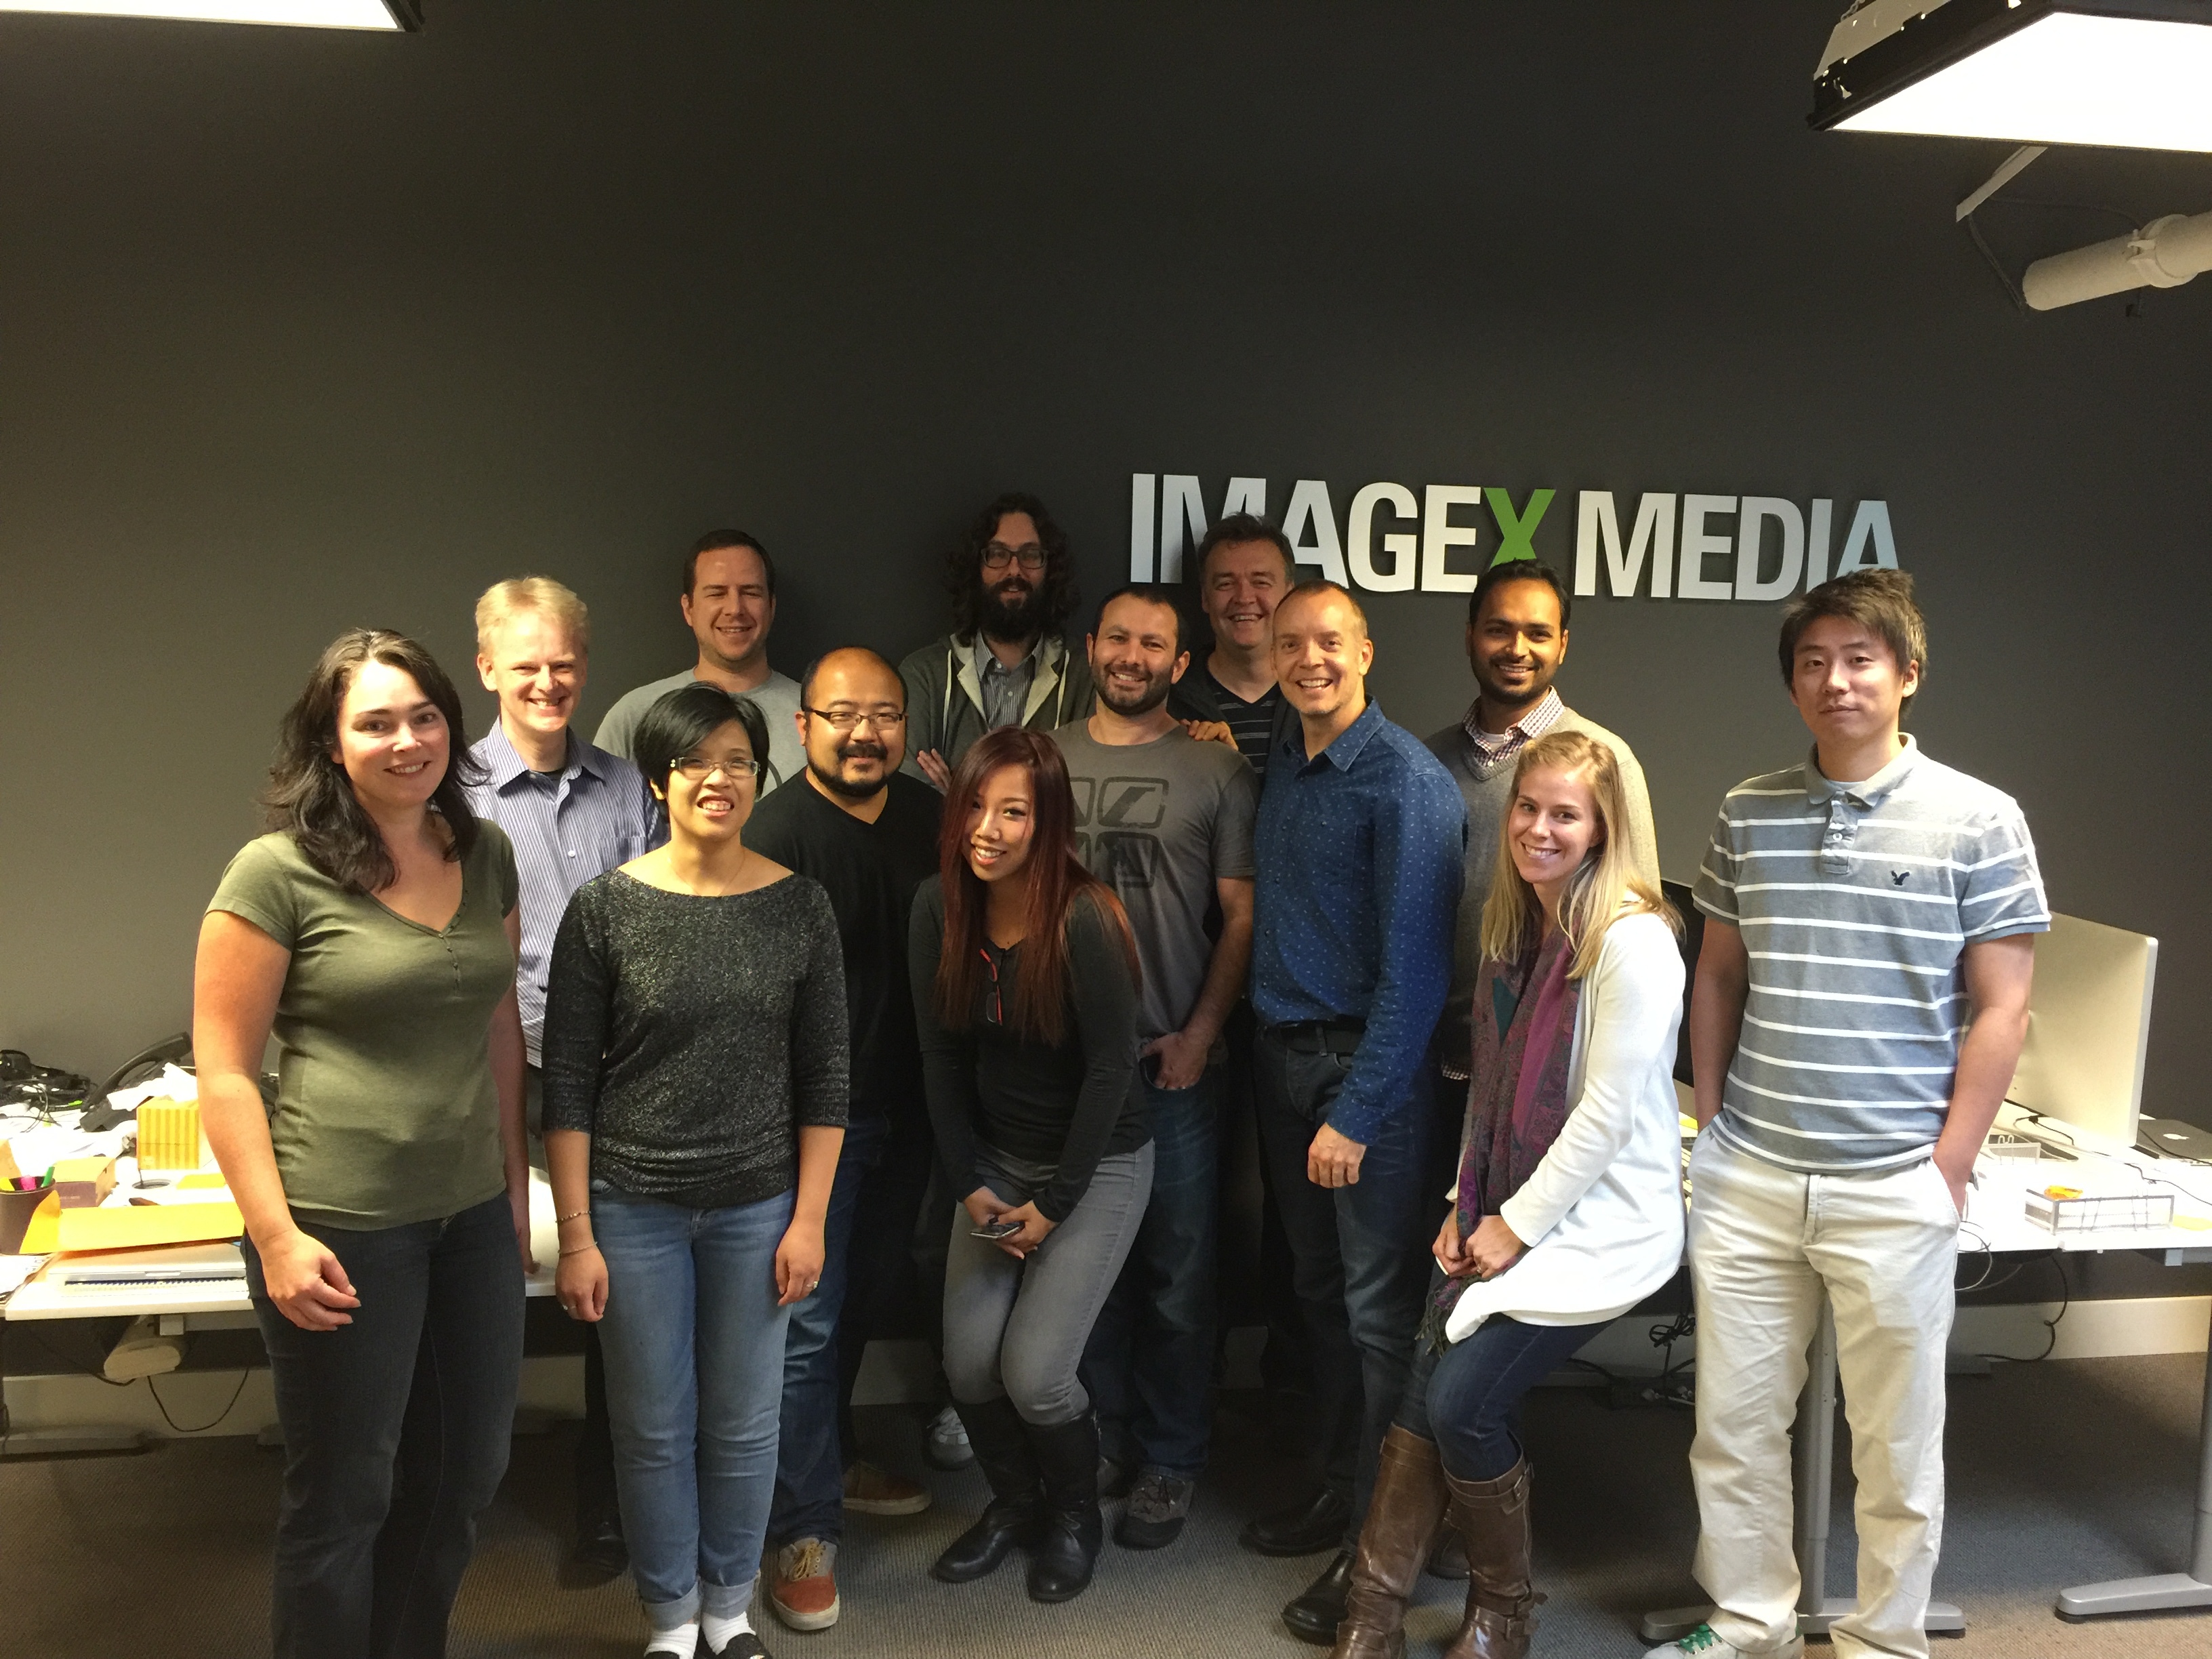 ImageX team in the office